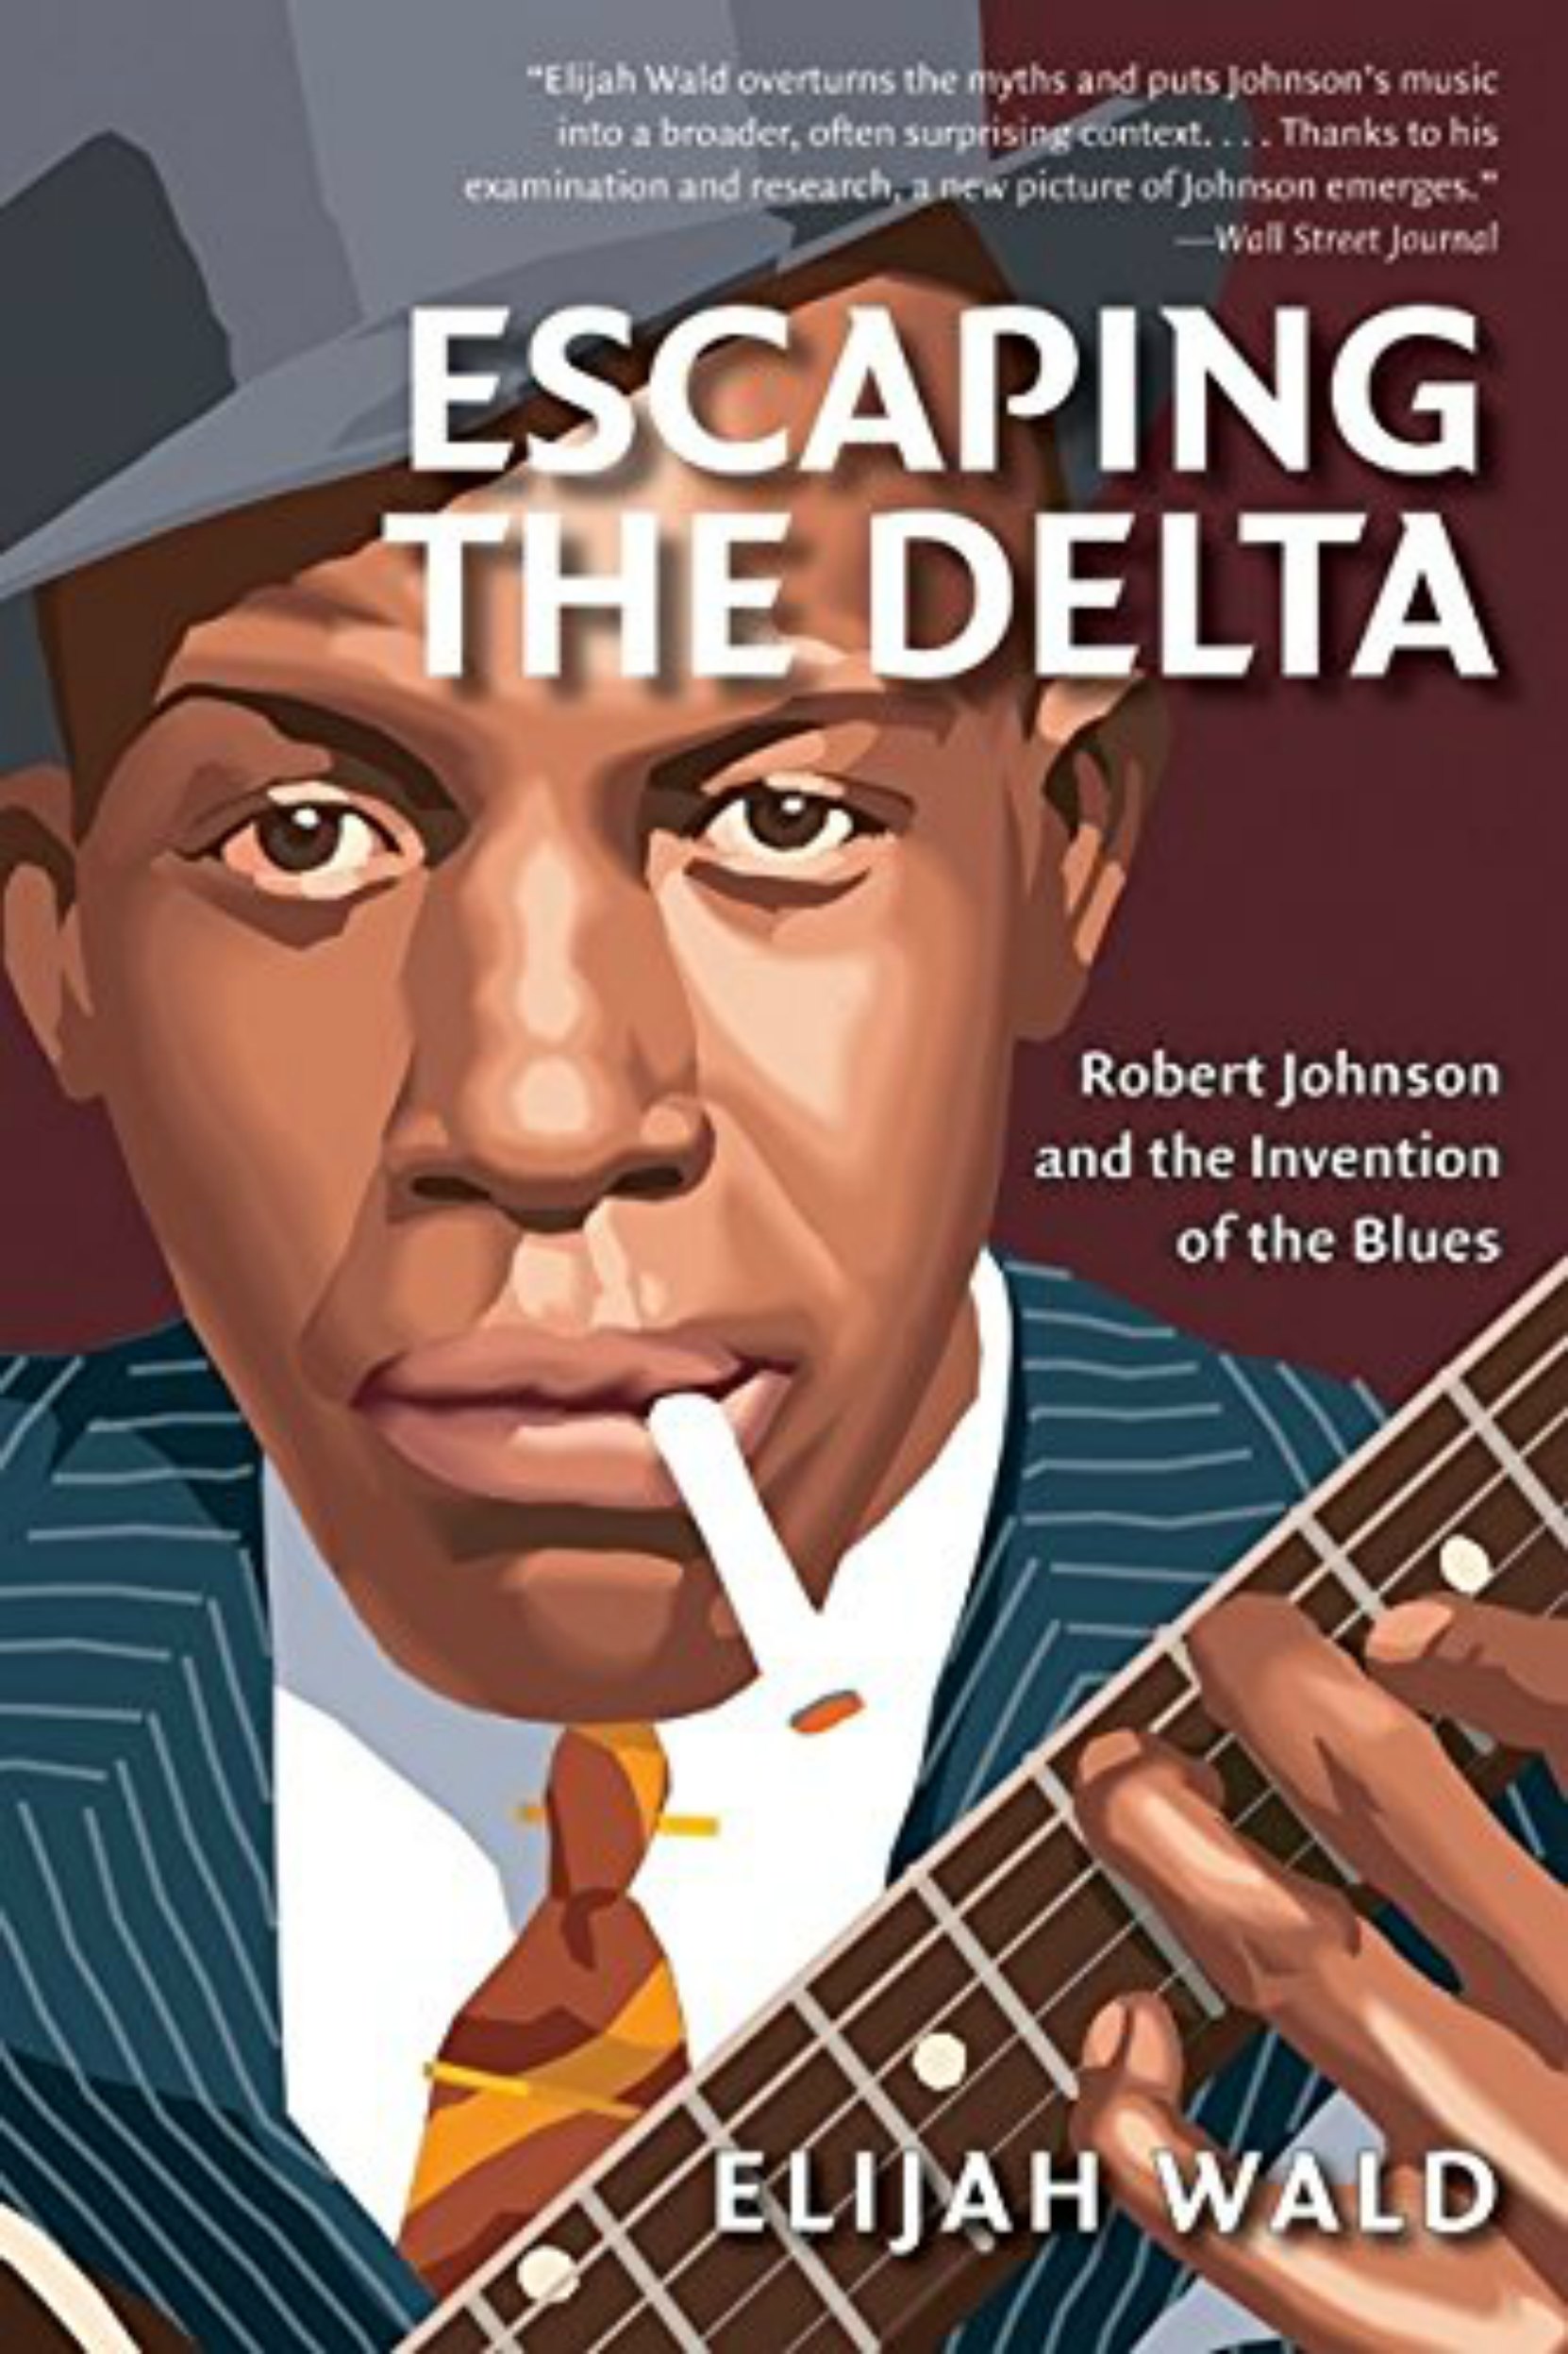 Book cover, Escaping The Delta - Robert Johnson and the Invention of the Blues, by Elijah Wald.